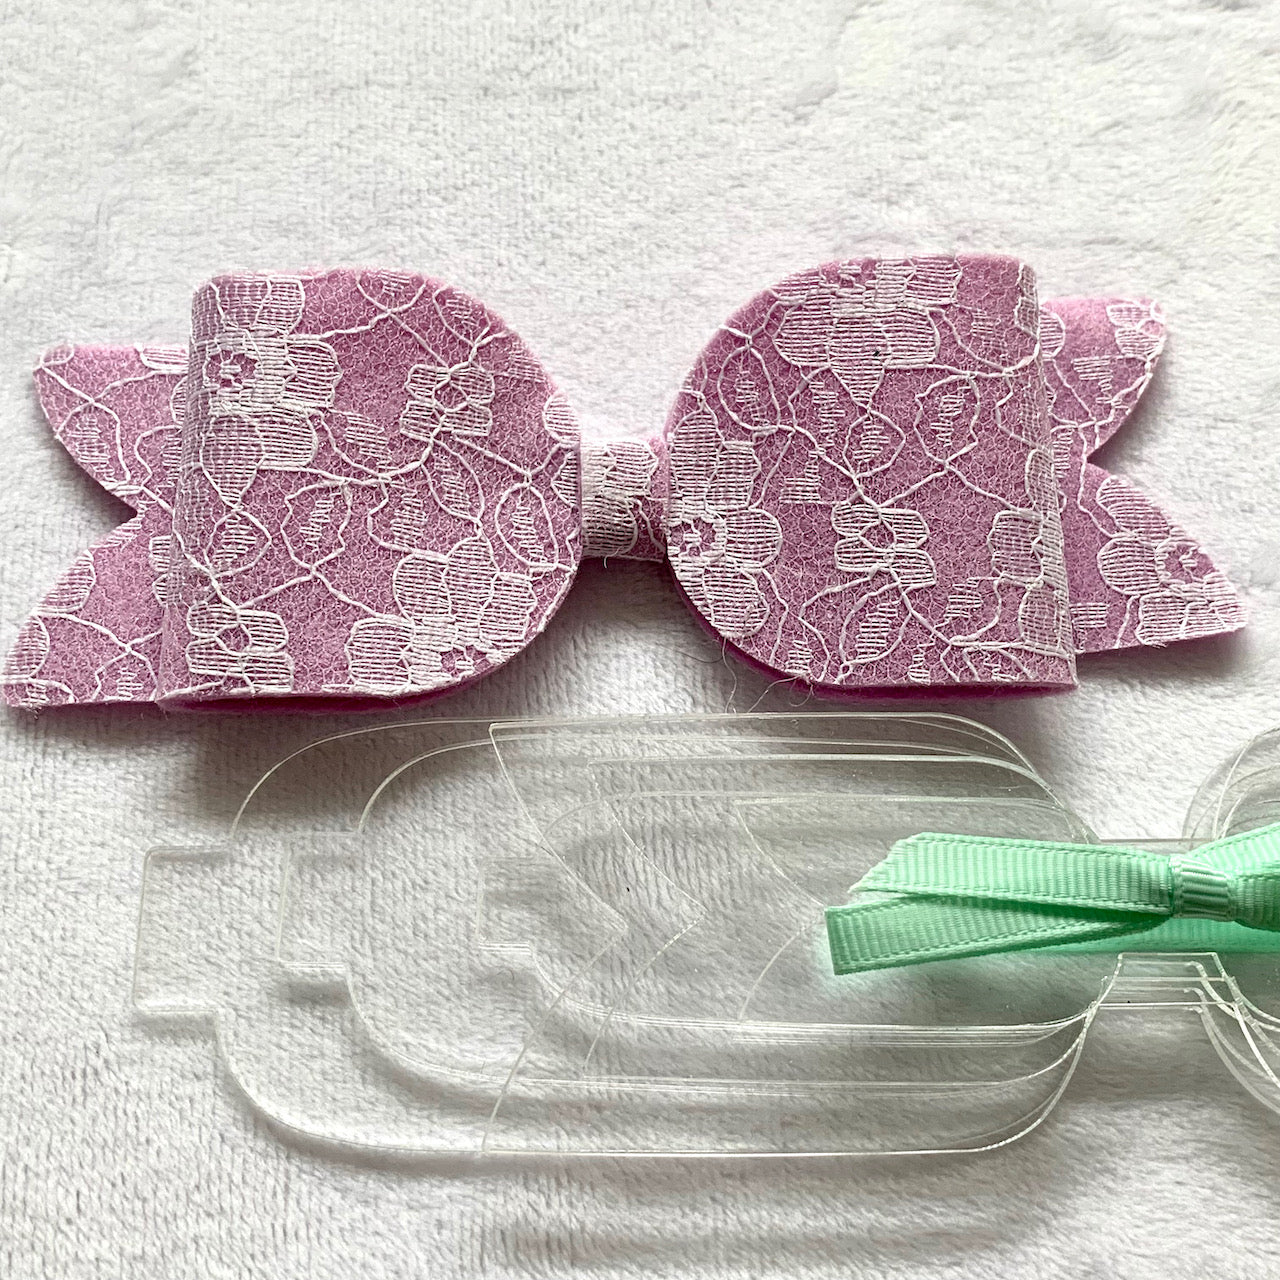 Boxy Bow Template for making hair bows